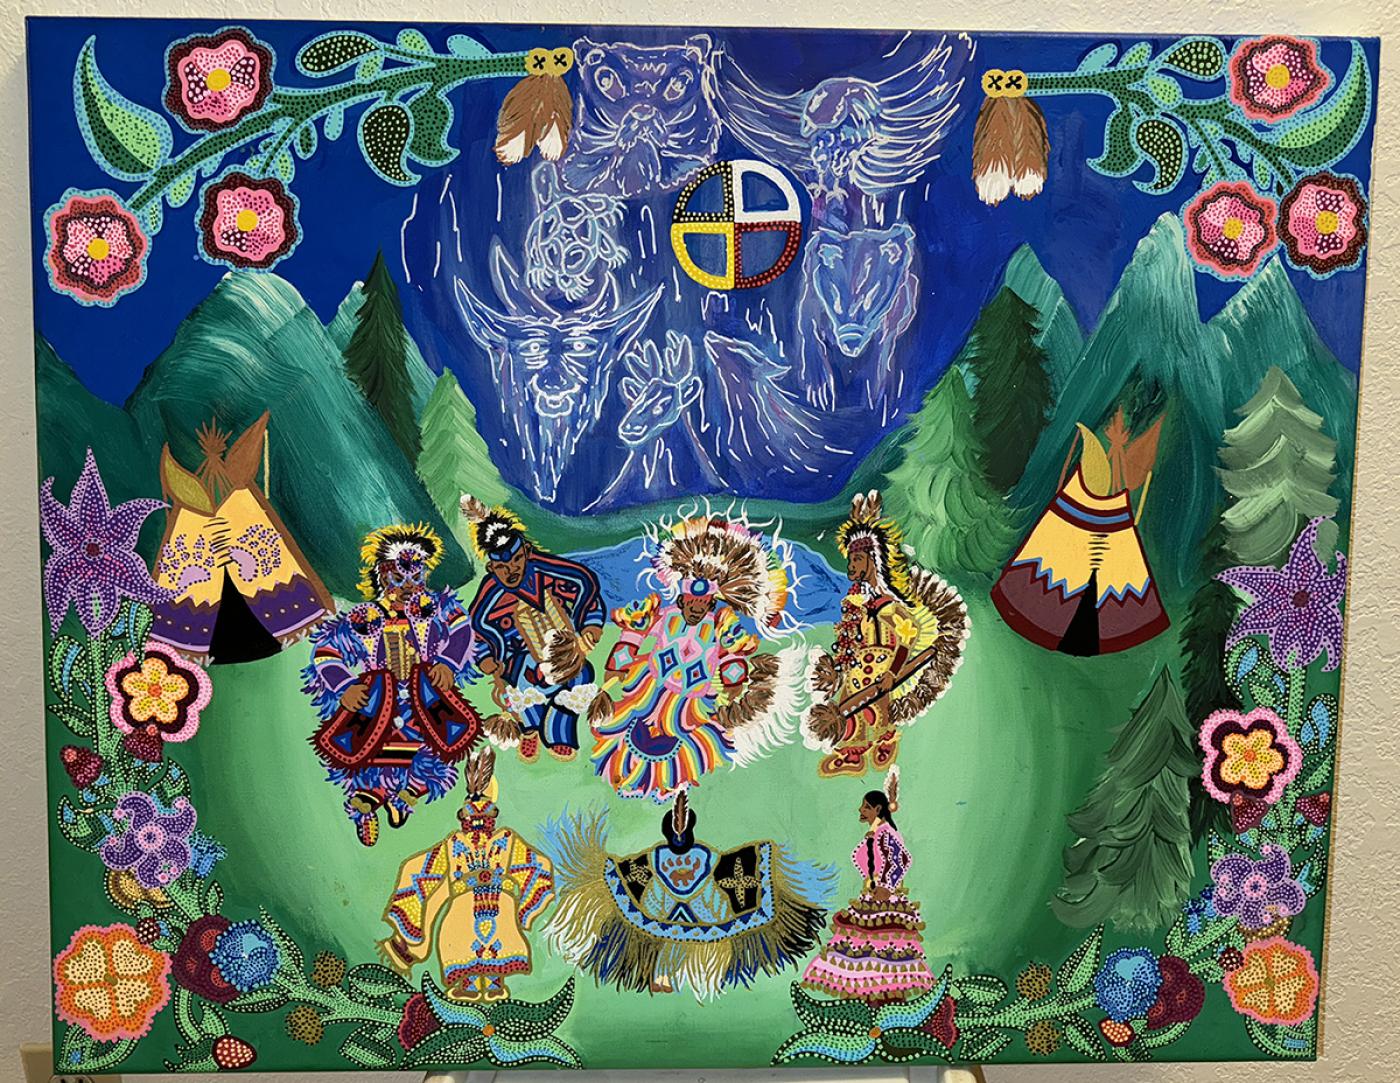 Painting of seven dancers in a circle surrounded by trees, mountains, flowers, and two teepees, with shining outlines of animals depicting the seven grandfathers hang in the night sky.